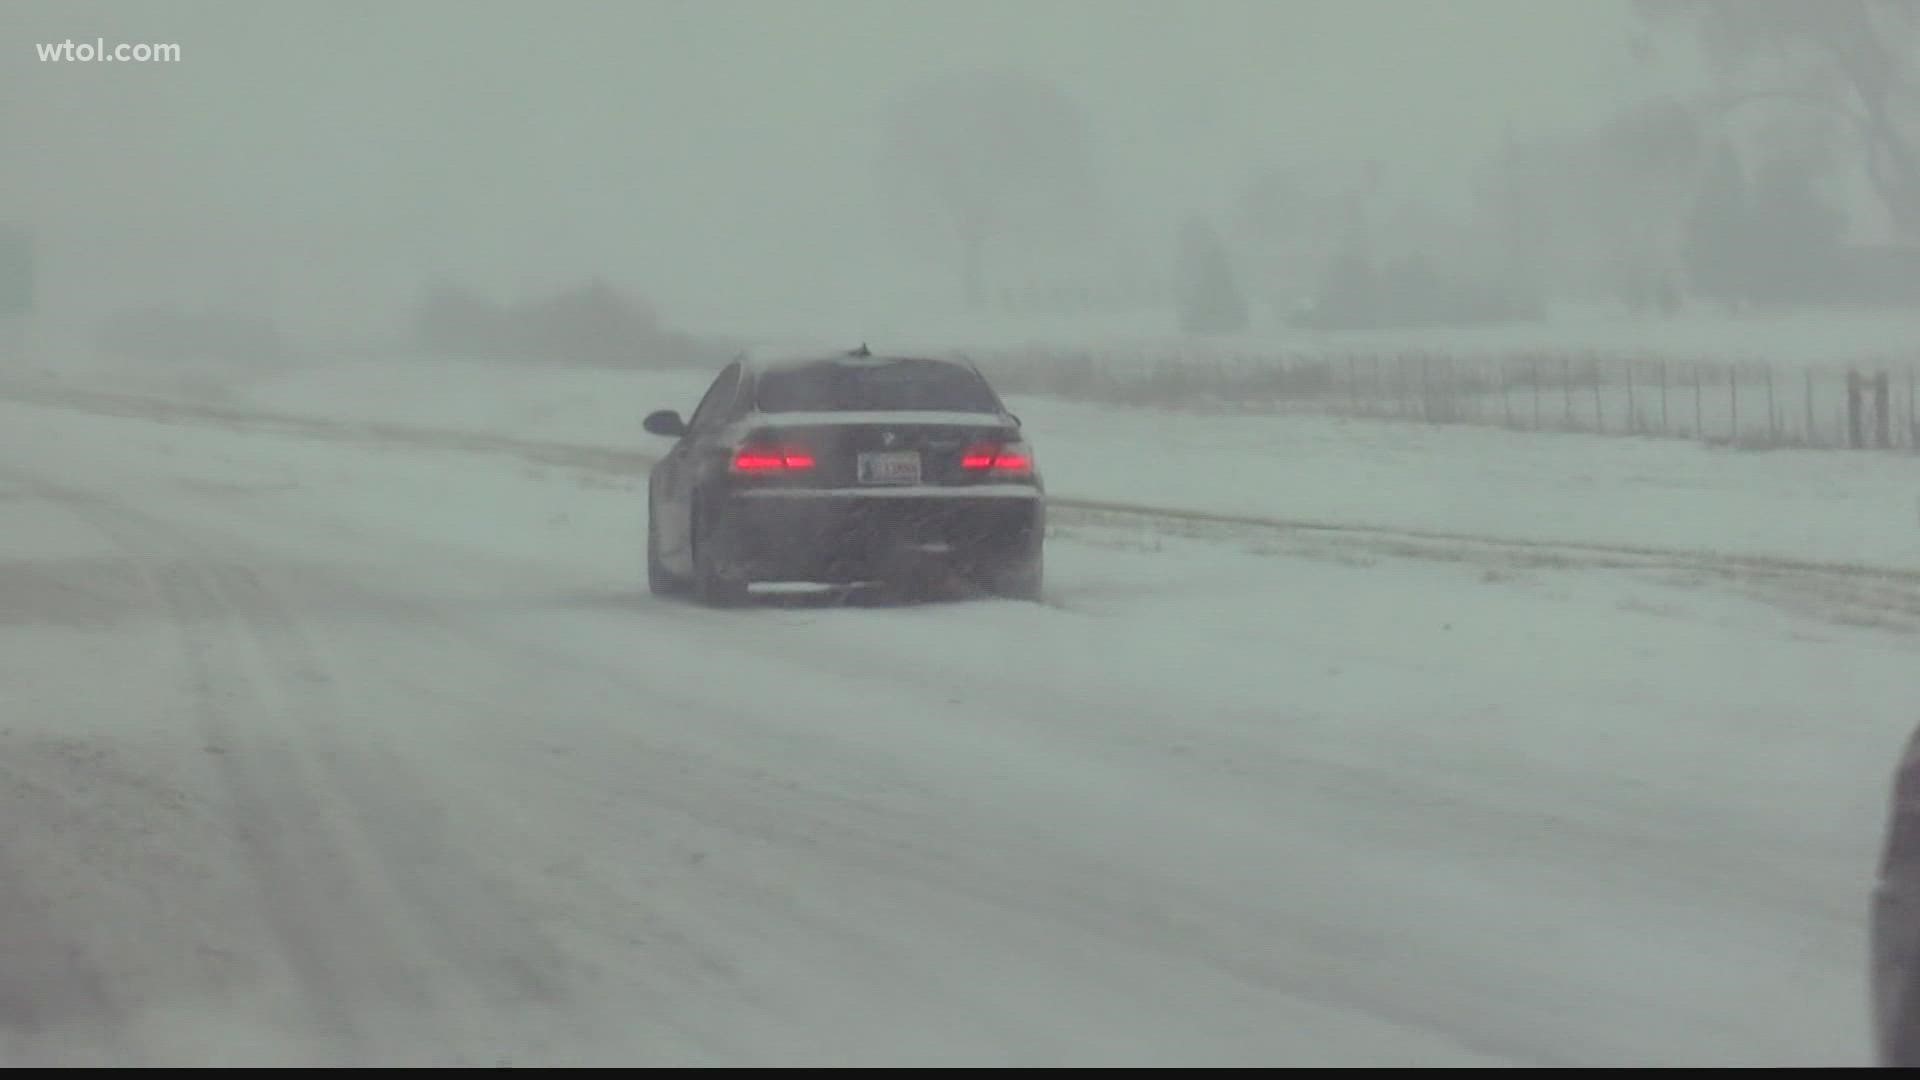 What do different snow emergency levels mean? When is it safe for me to drive? We find out safe driving tips during the oncoming winter storm.